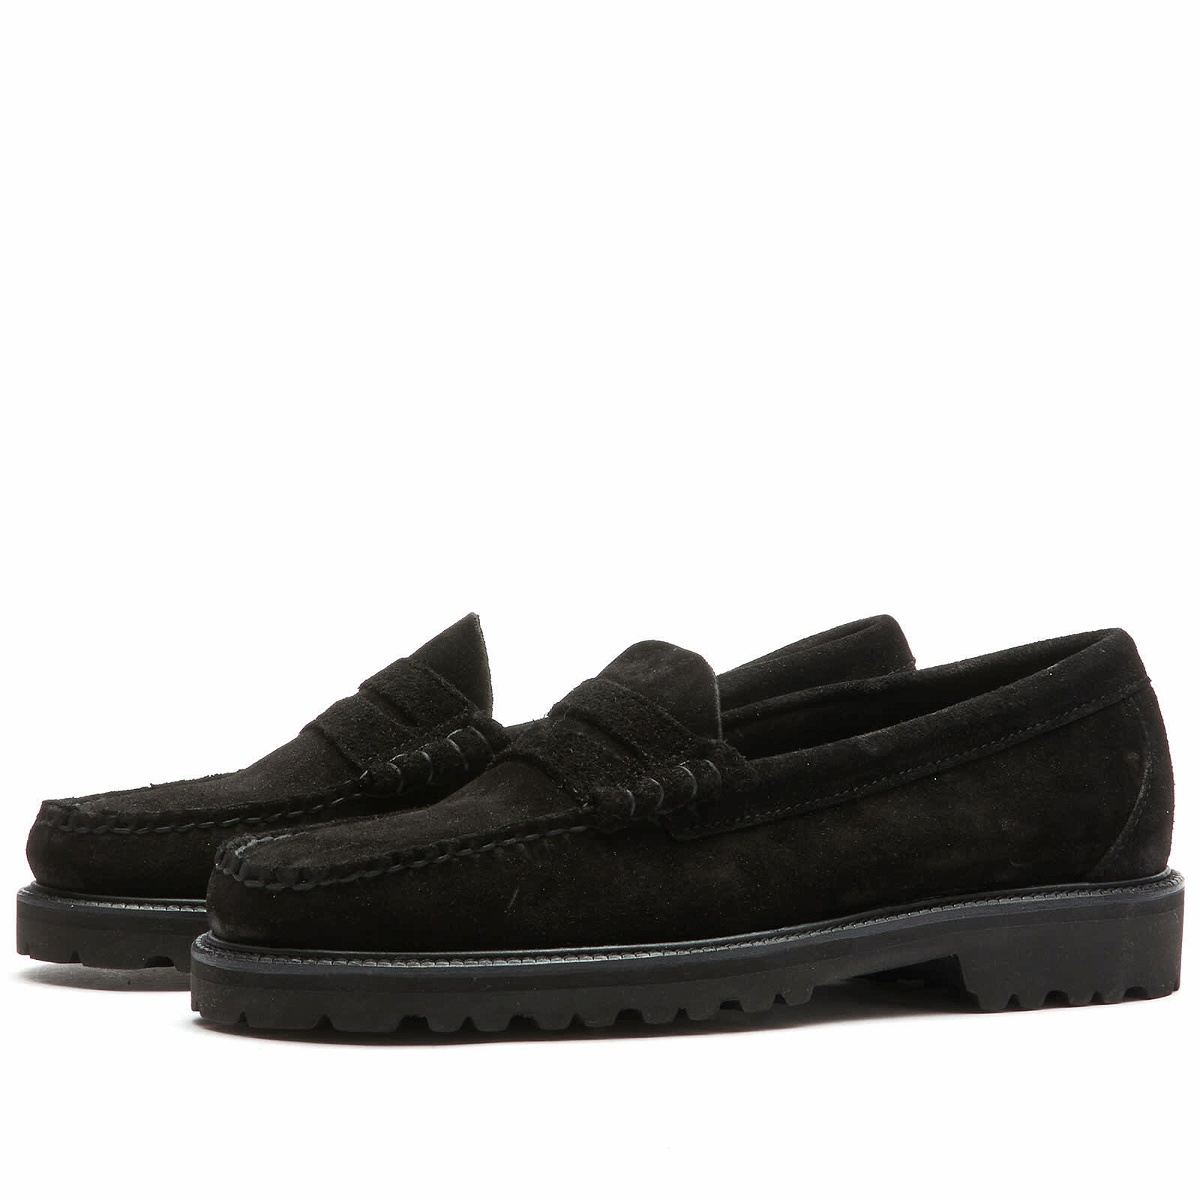 Bass Weejuns Men's Larson 90s Loafer in Black Suede Bass Weejuns